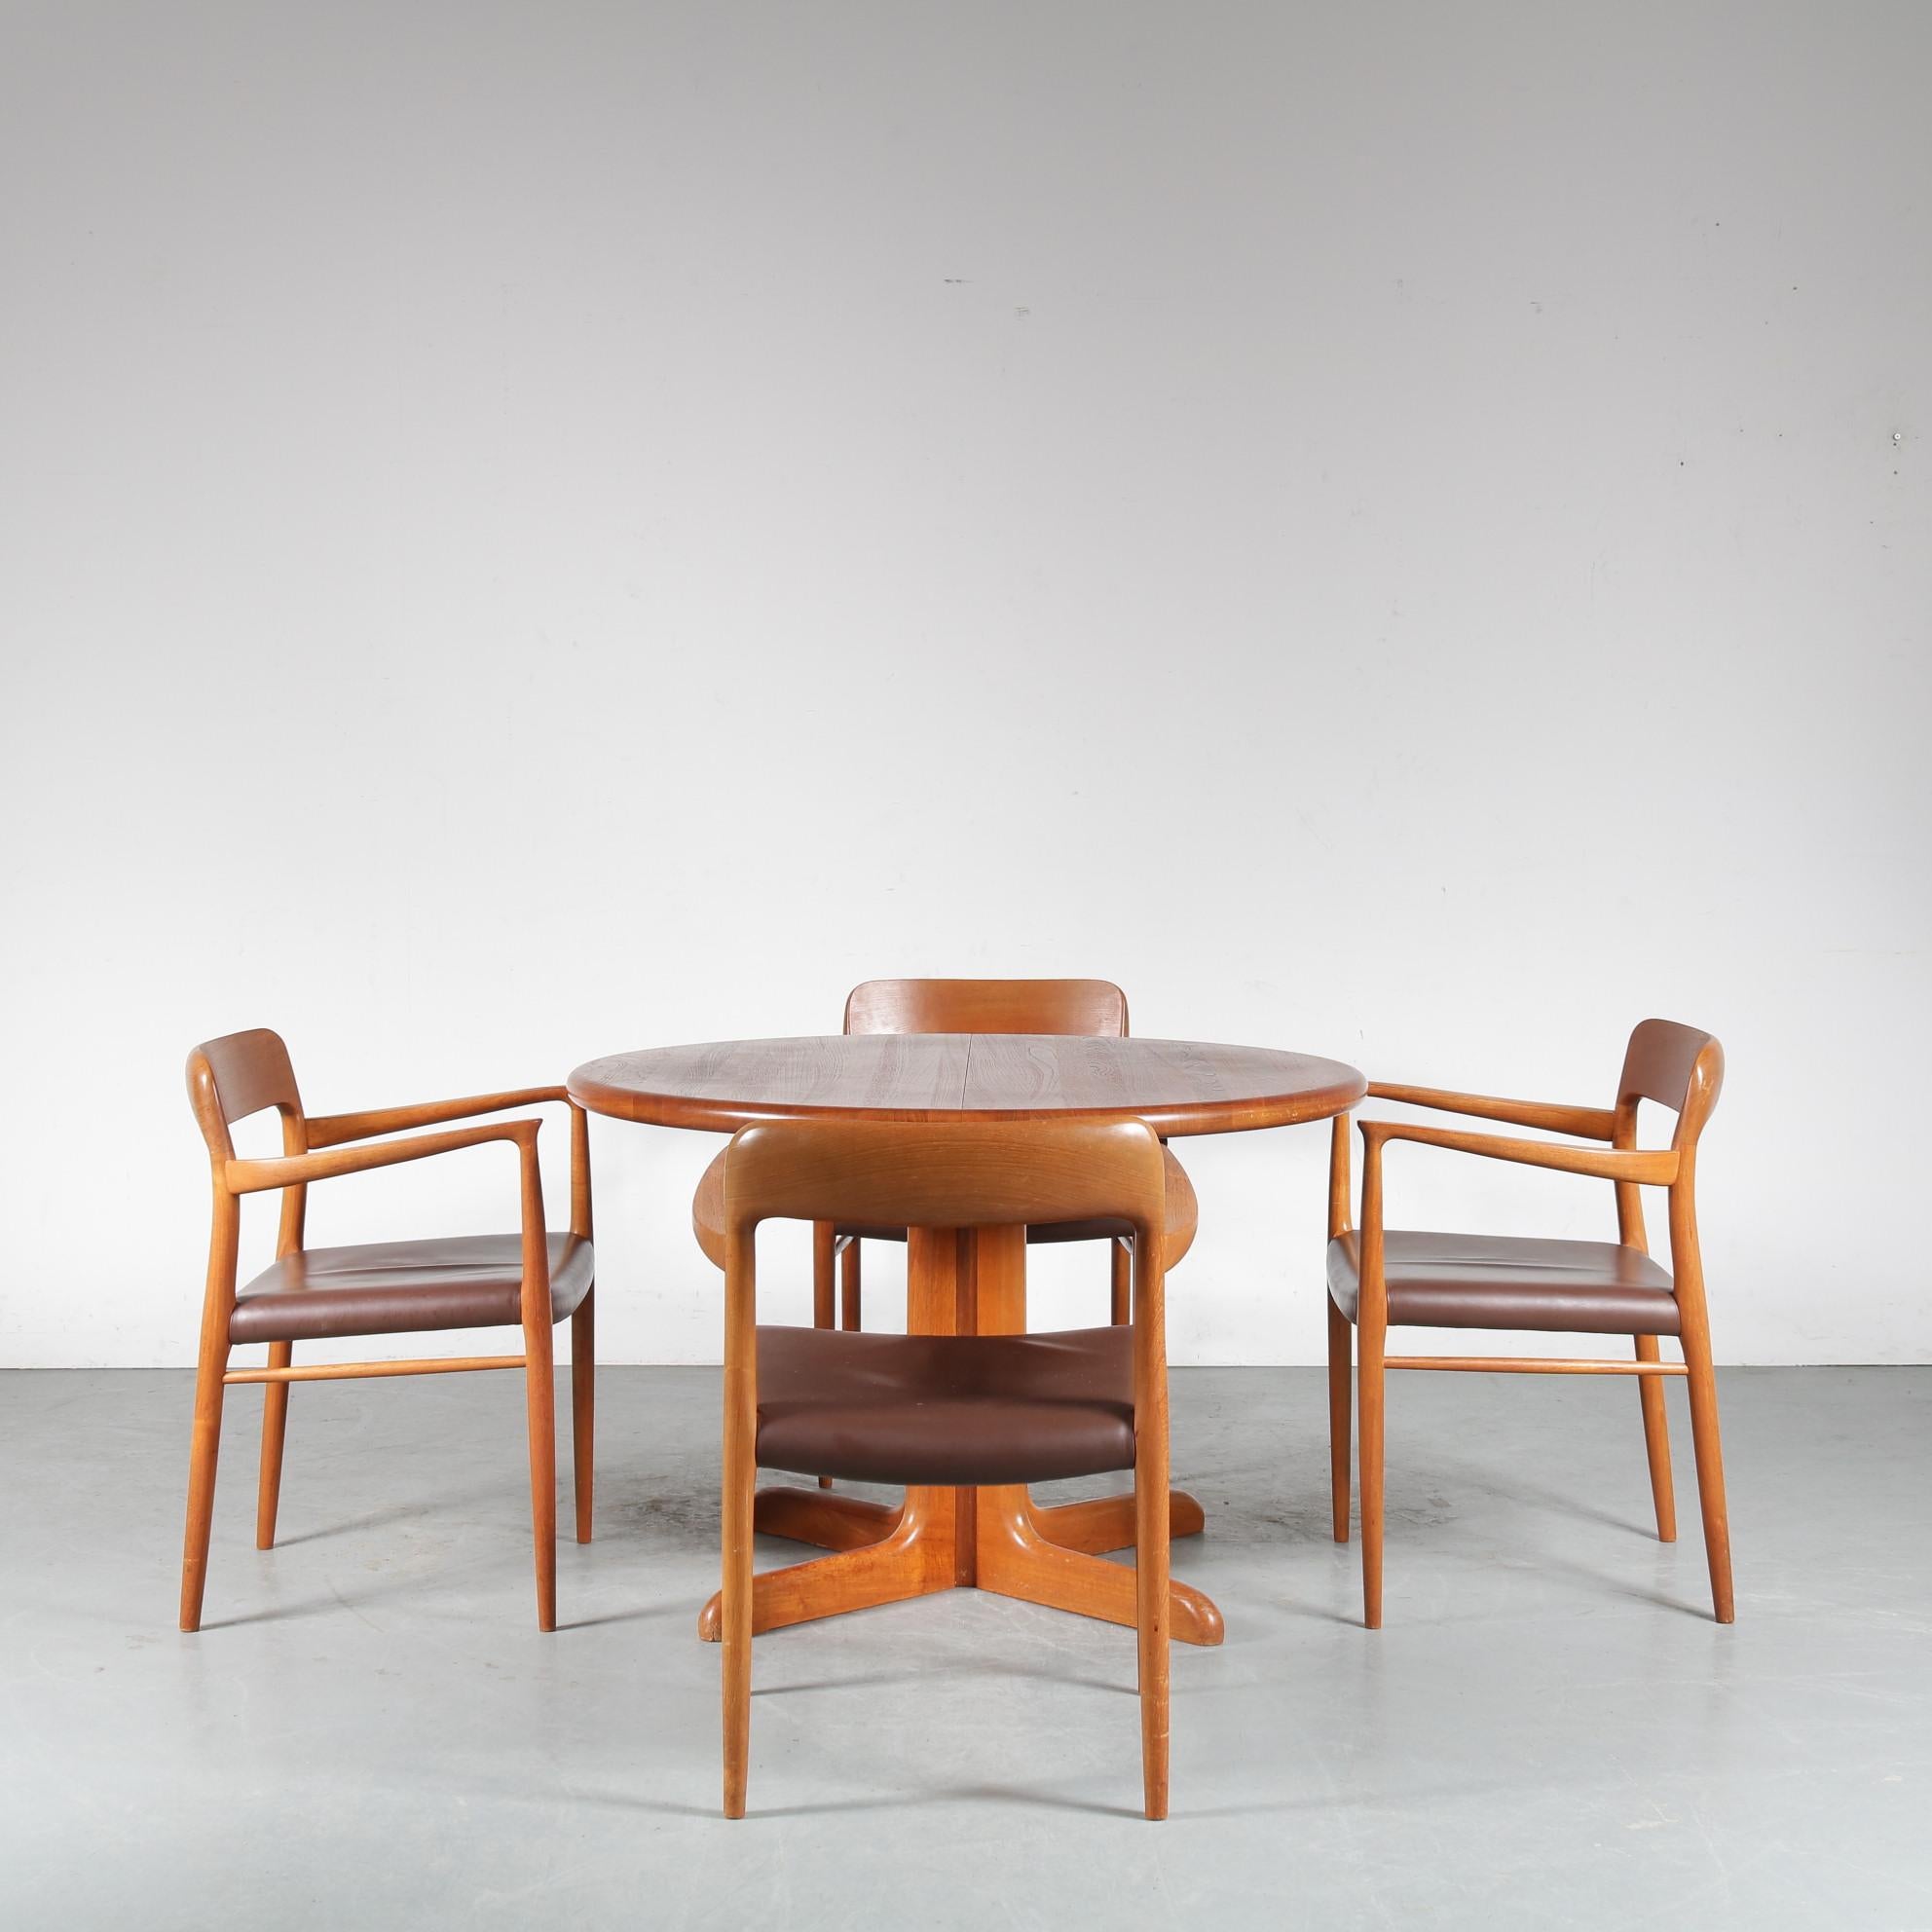 A beautiful dining set containing one extendible dining table and four arm chairs, designed by Niels Otto Møller, manufactured by Møller in Denmark around 1960.

The dining table has a round top with a diameter of 110 cm, which can be extended by